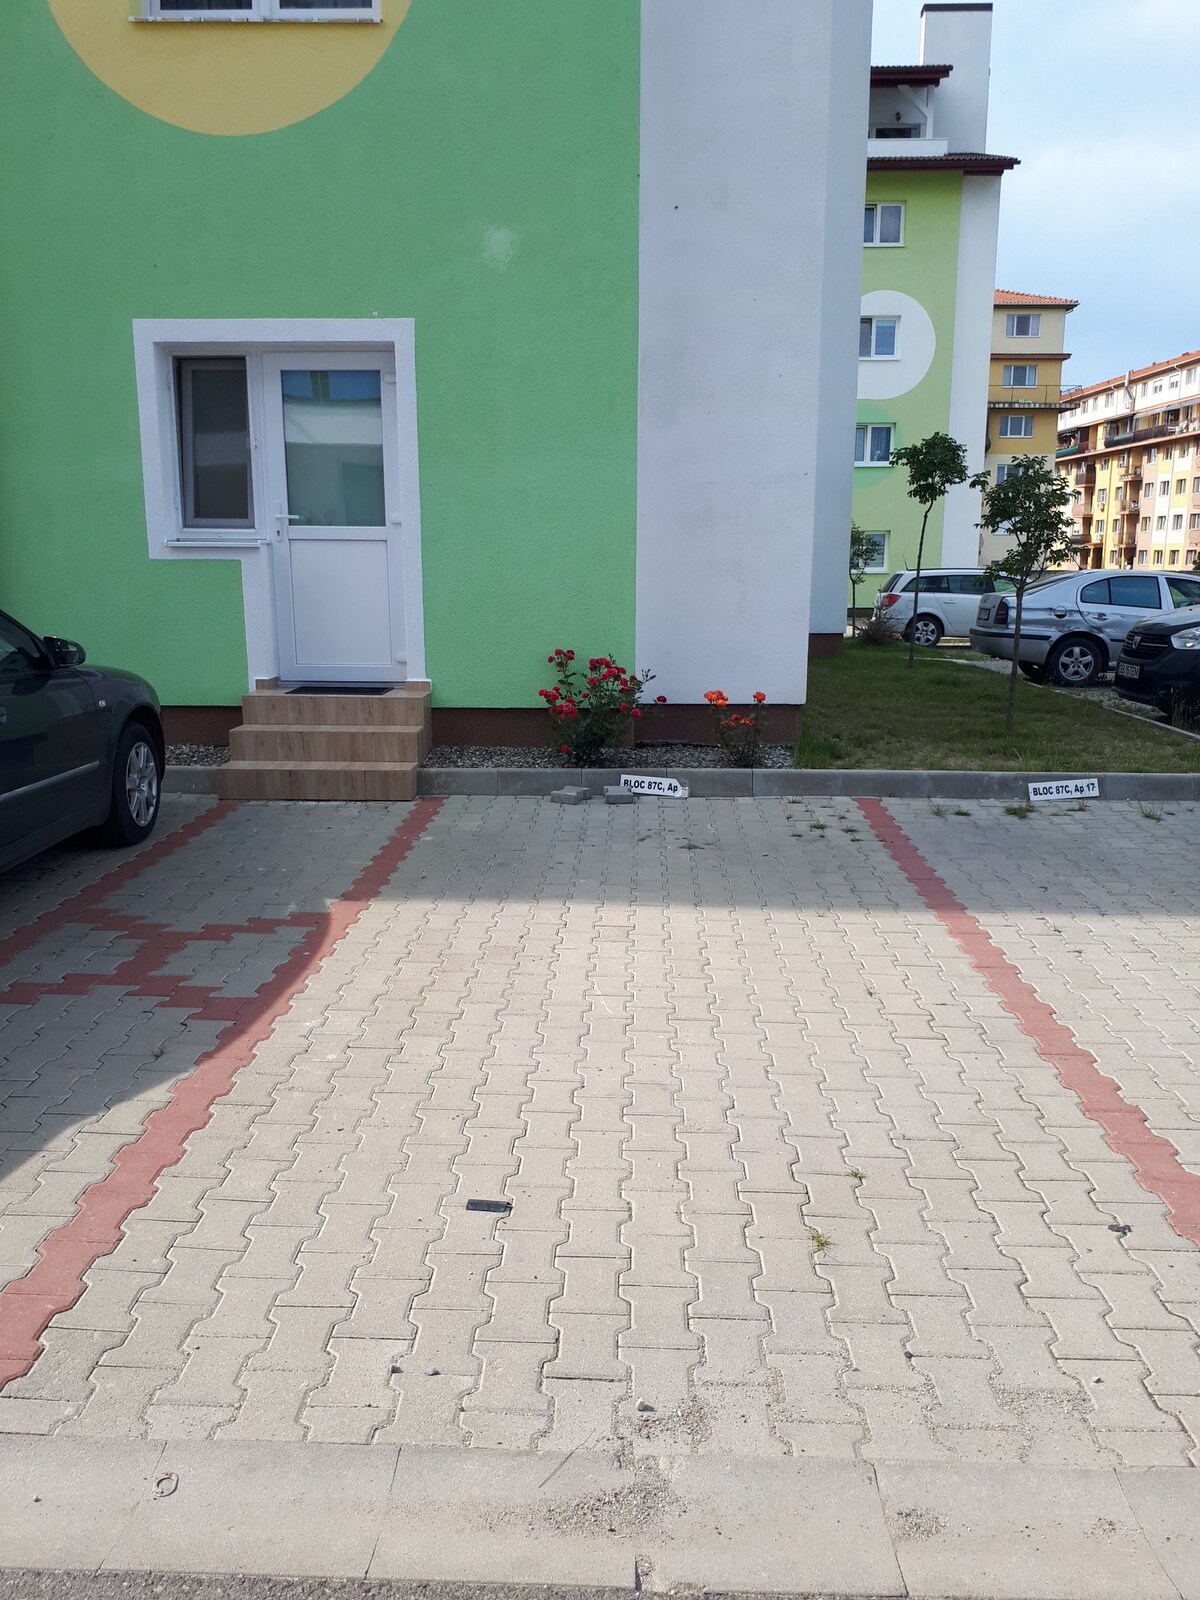 Budget Studio Ciresica with free parking